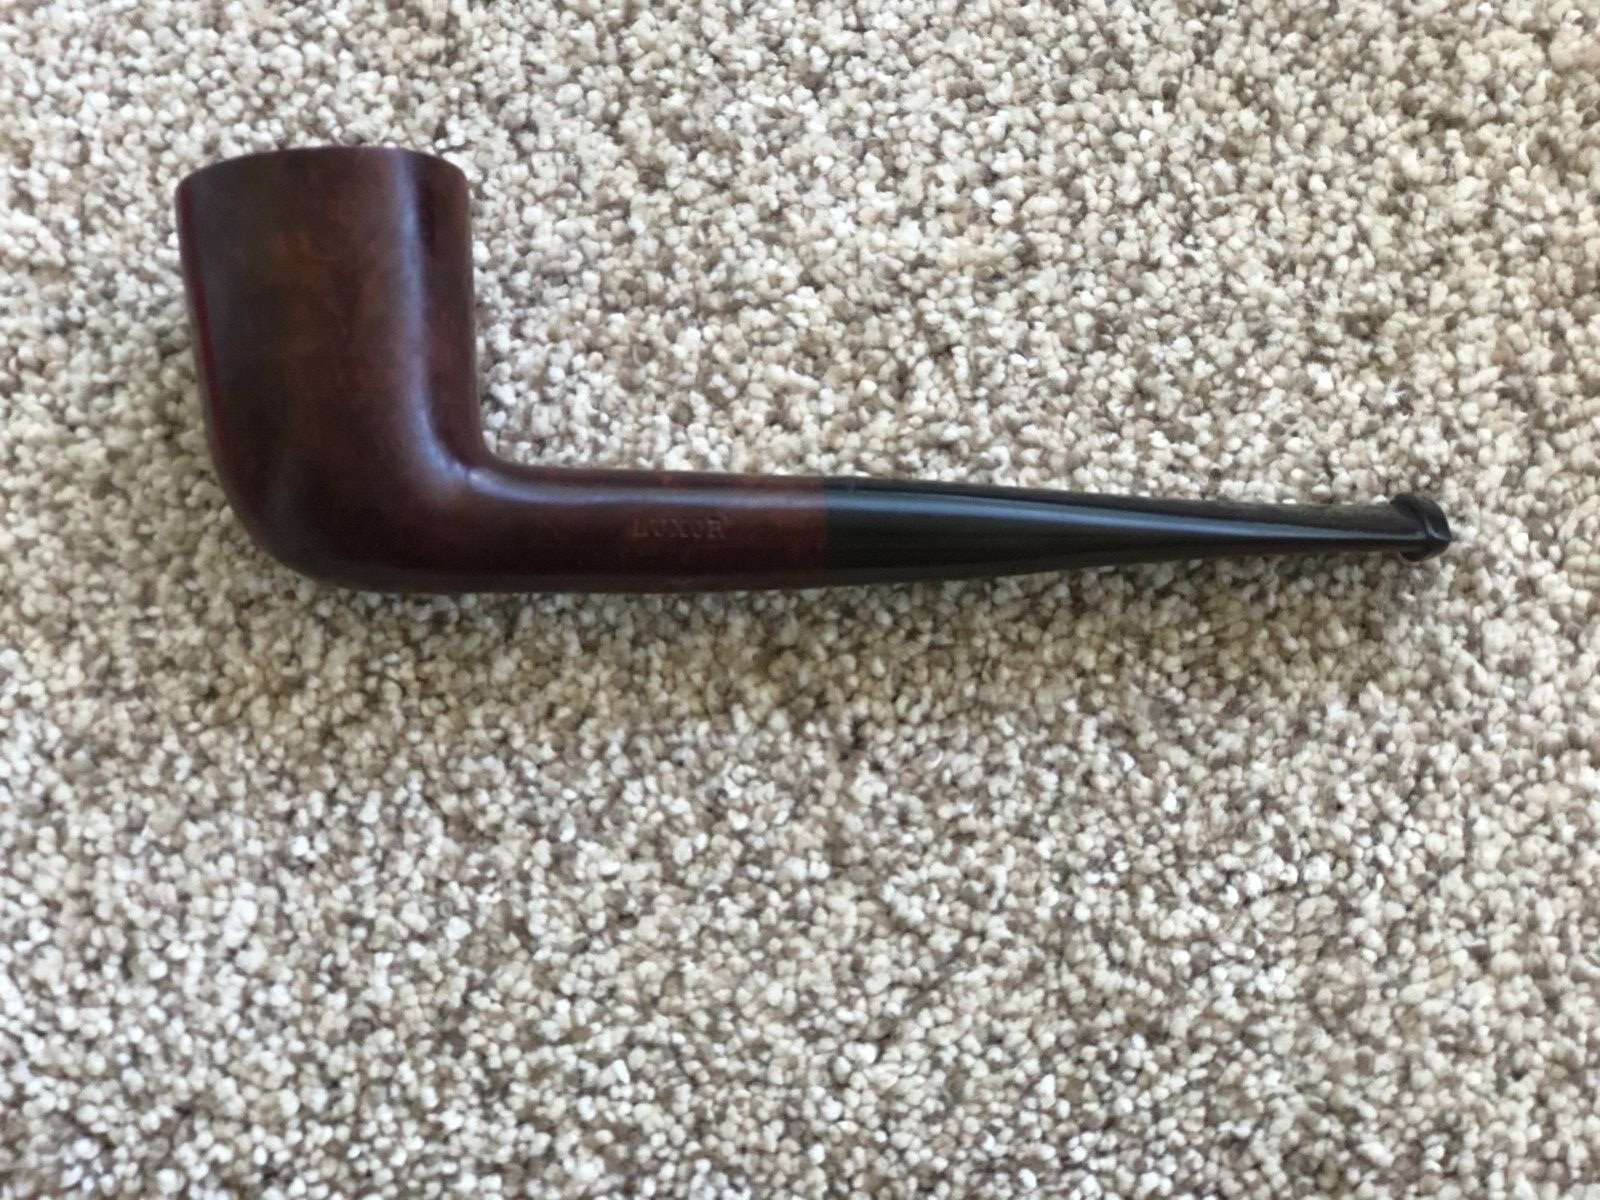 CHAPUS-COMOY LUXOR 1950'S DUBLIN BRIAR PIPE MADE IN FRANCE